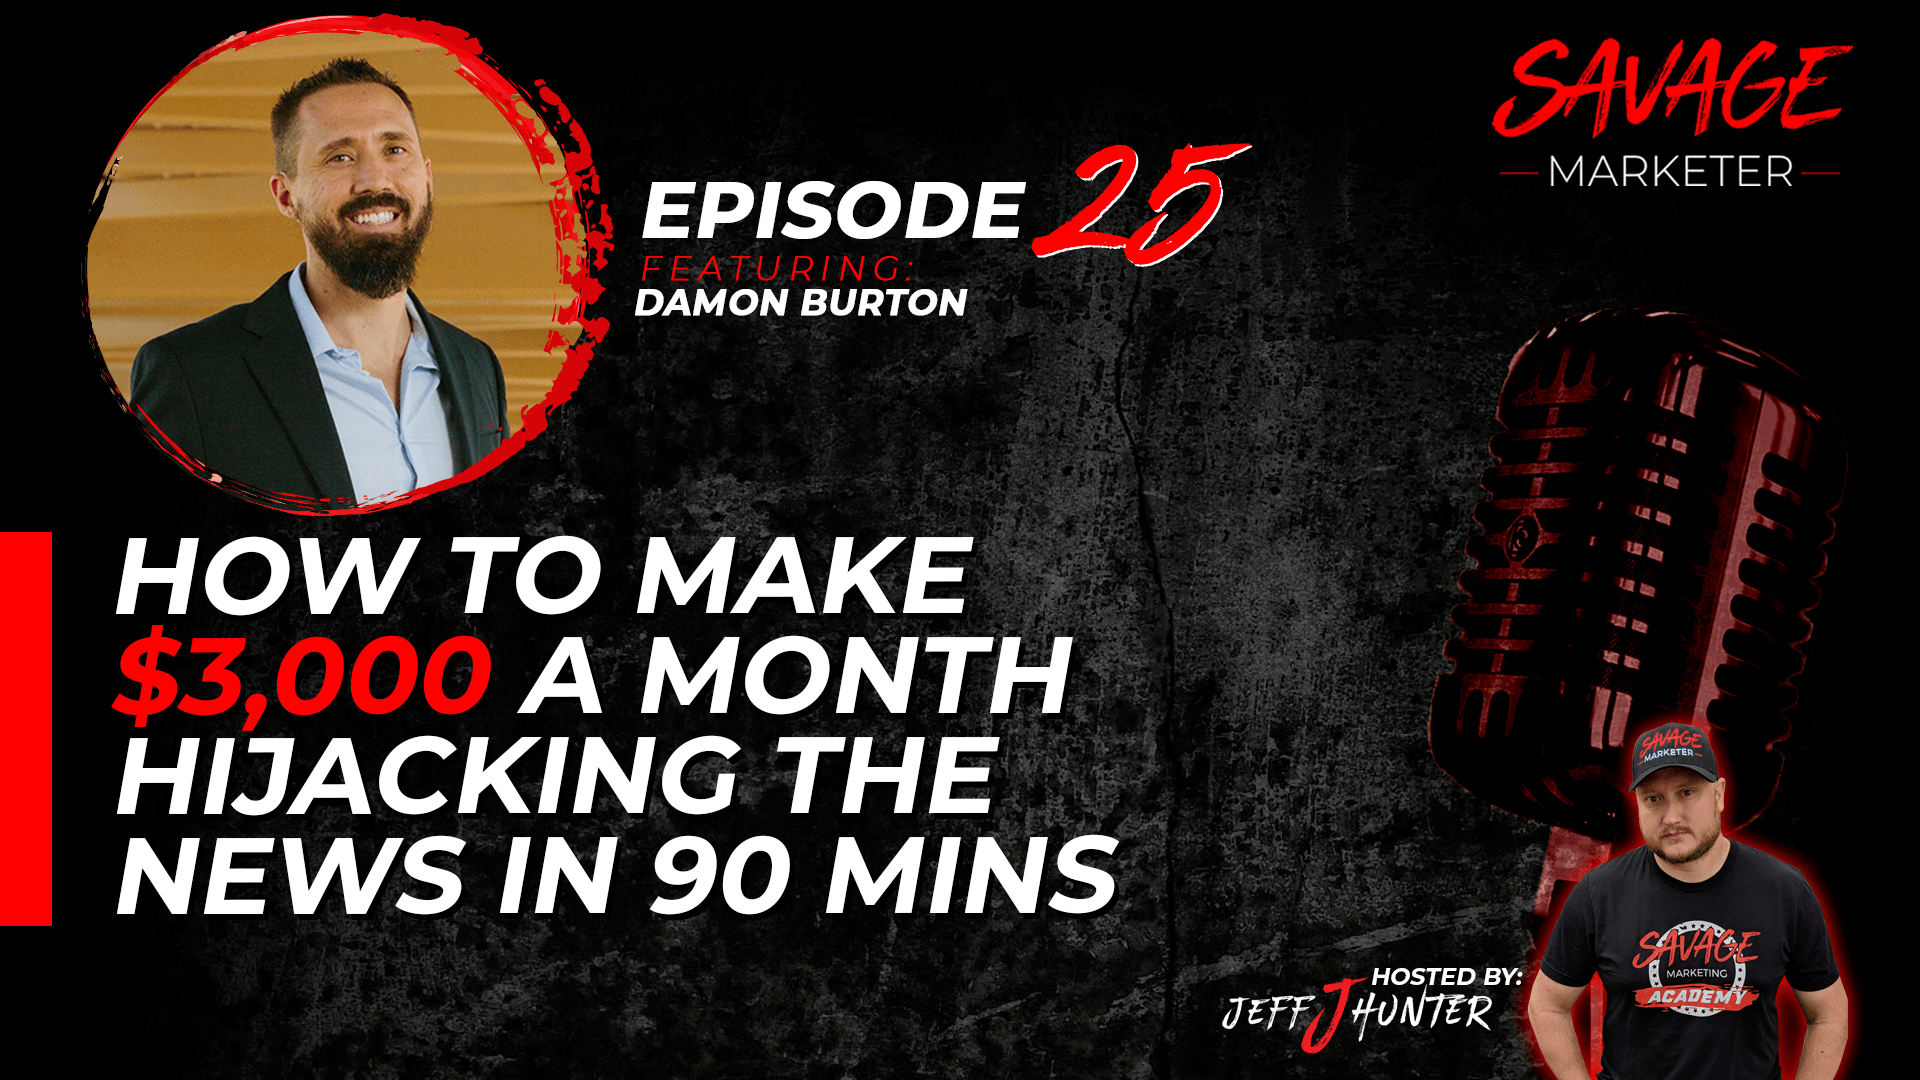 How to make $3,000 a month hijacking the news in 90 mins ft Damon Burton